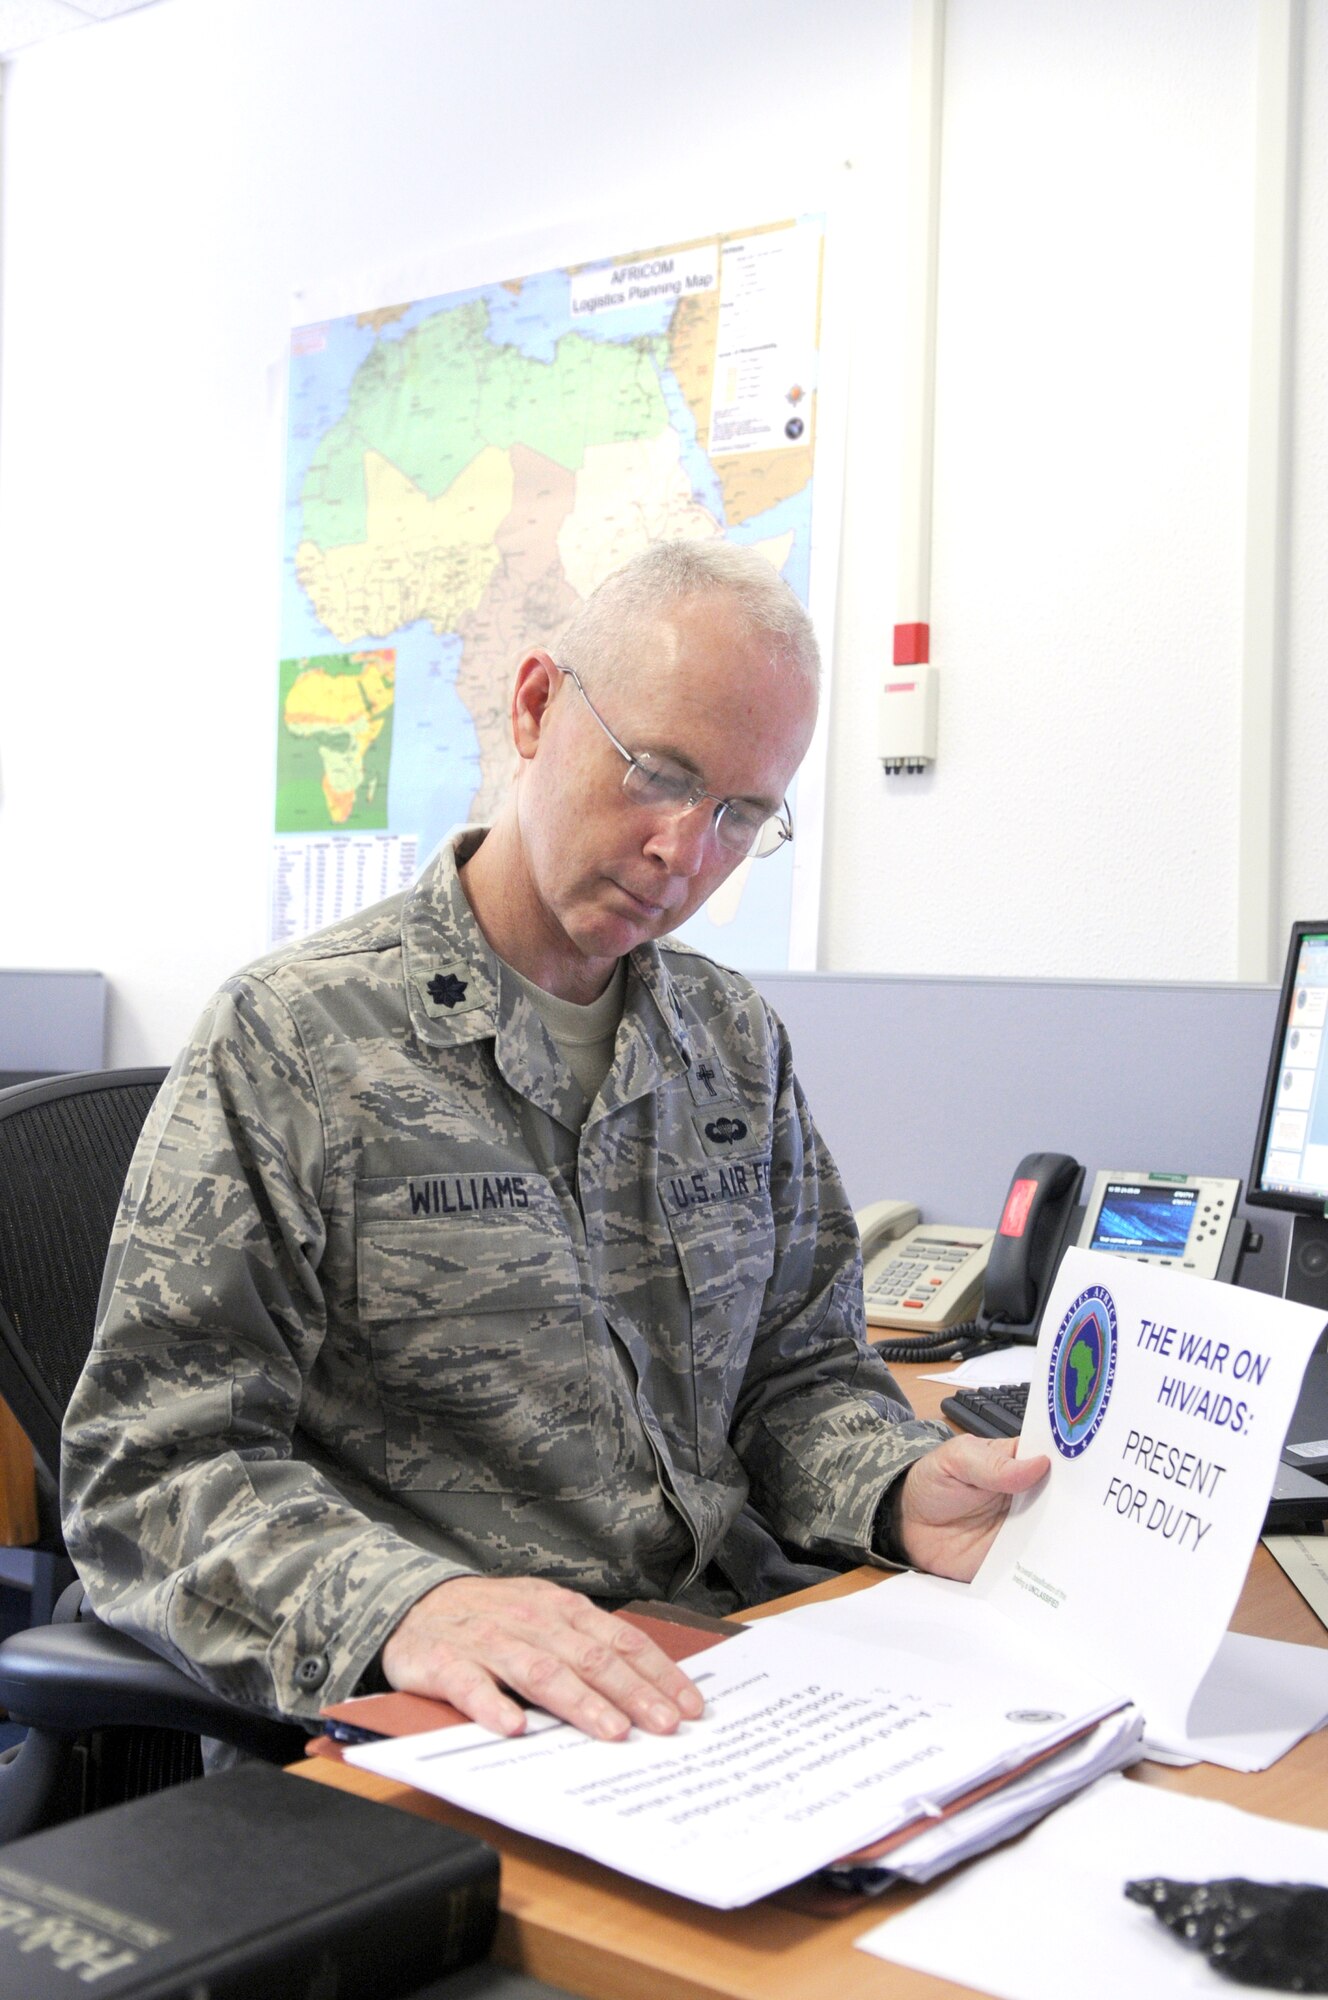 17th Air Force (Air Forces Africa) Command Chaplain (Lt. Col.) Rex Williams prepares material on the Department of Defense HIV/AIDs Prevention Program for U.S. Africa Command Theater Security Engagements. (USAF photo by Master Sgt. Jim Fisher)